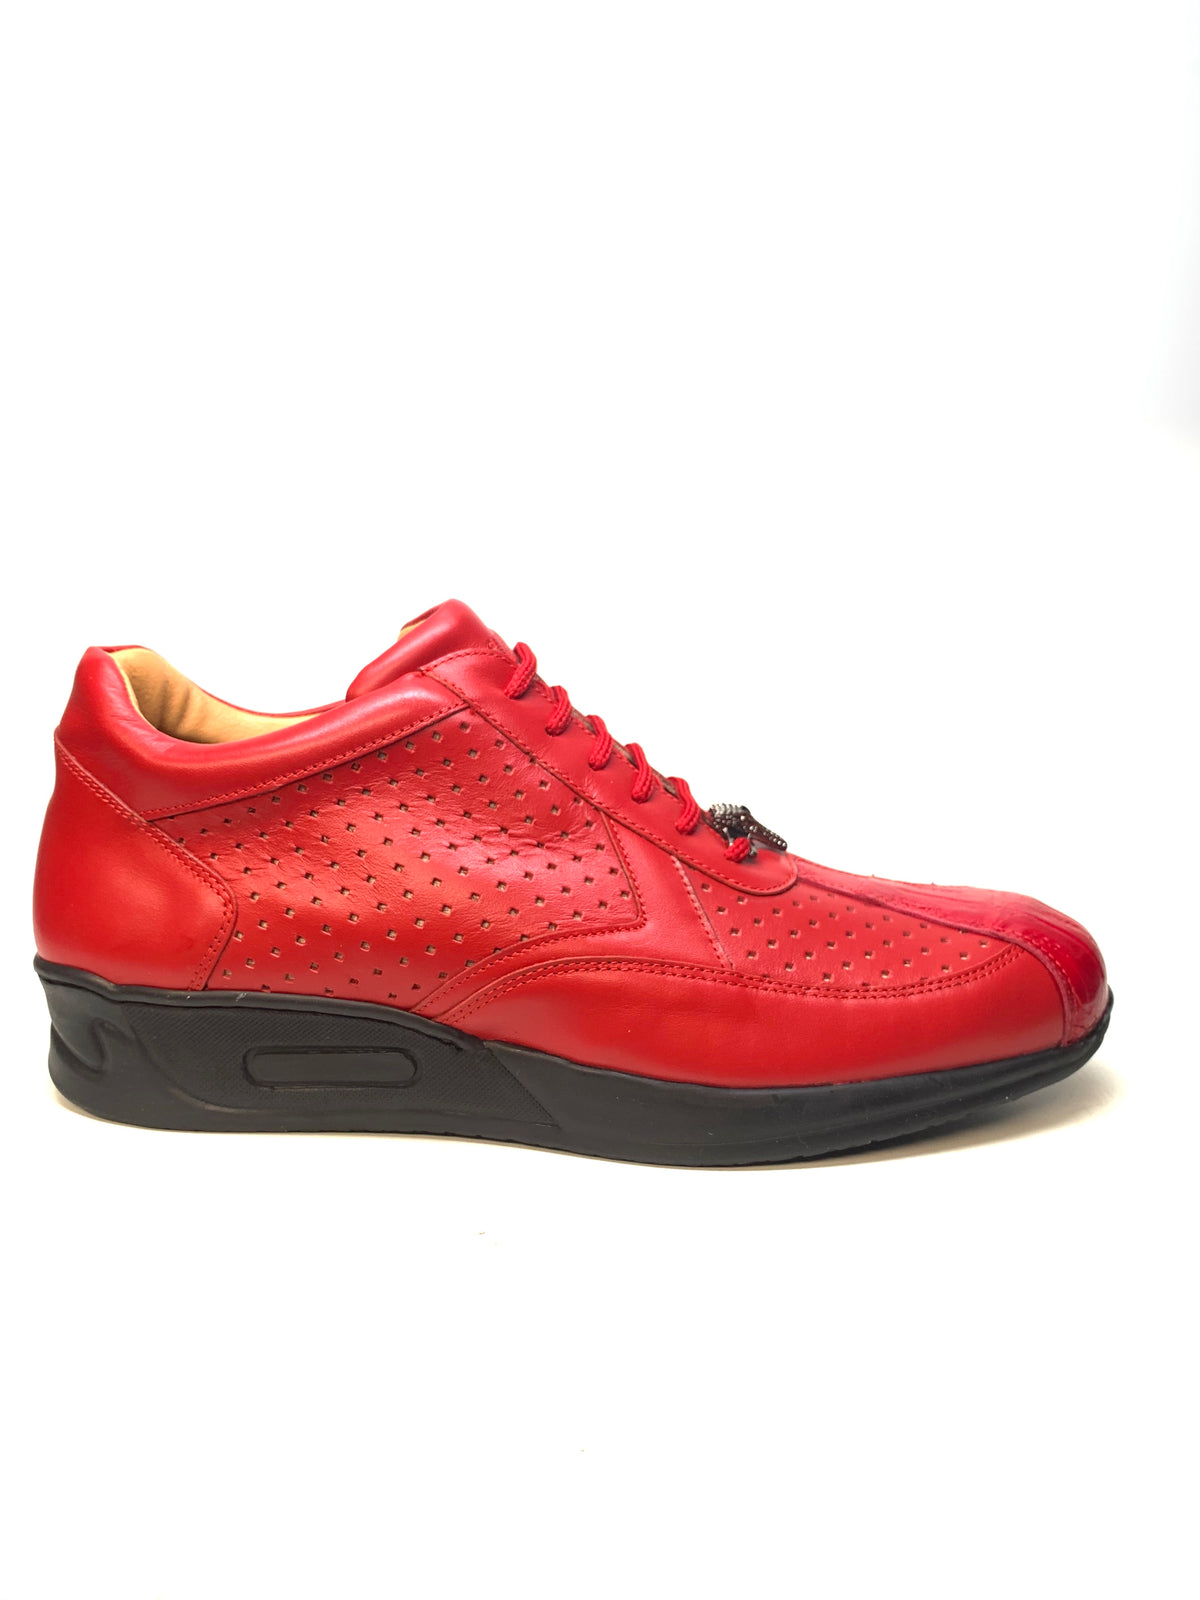 Mauri M770 Red Crocodile Perforated Nappa Leather Sneaker - Dudes Boutique